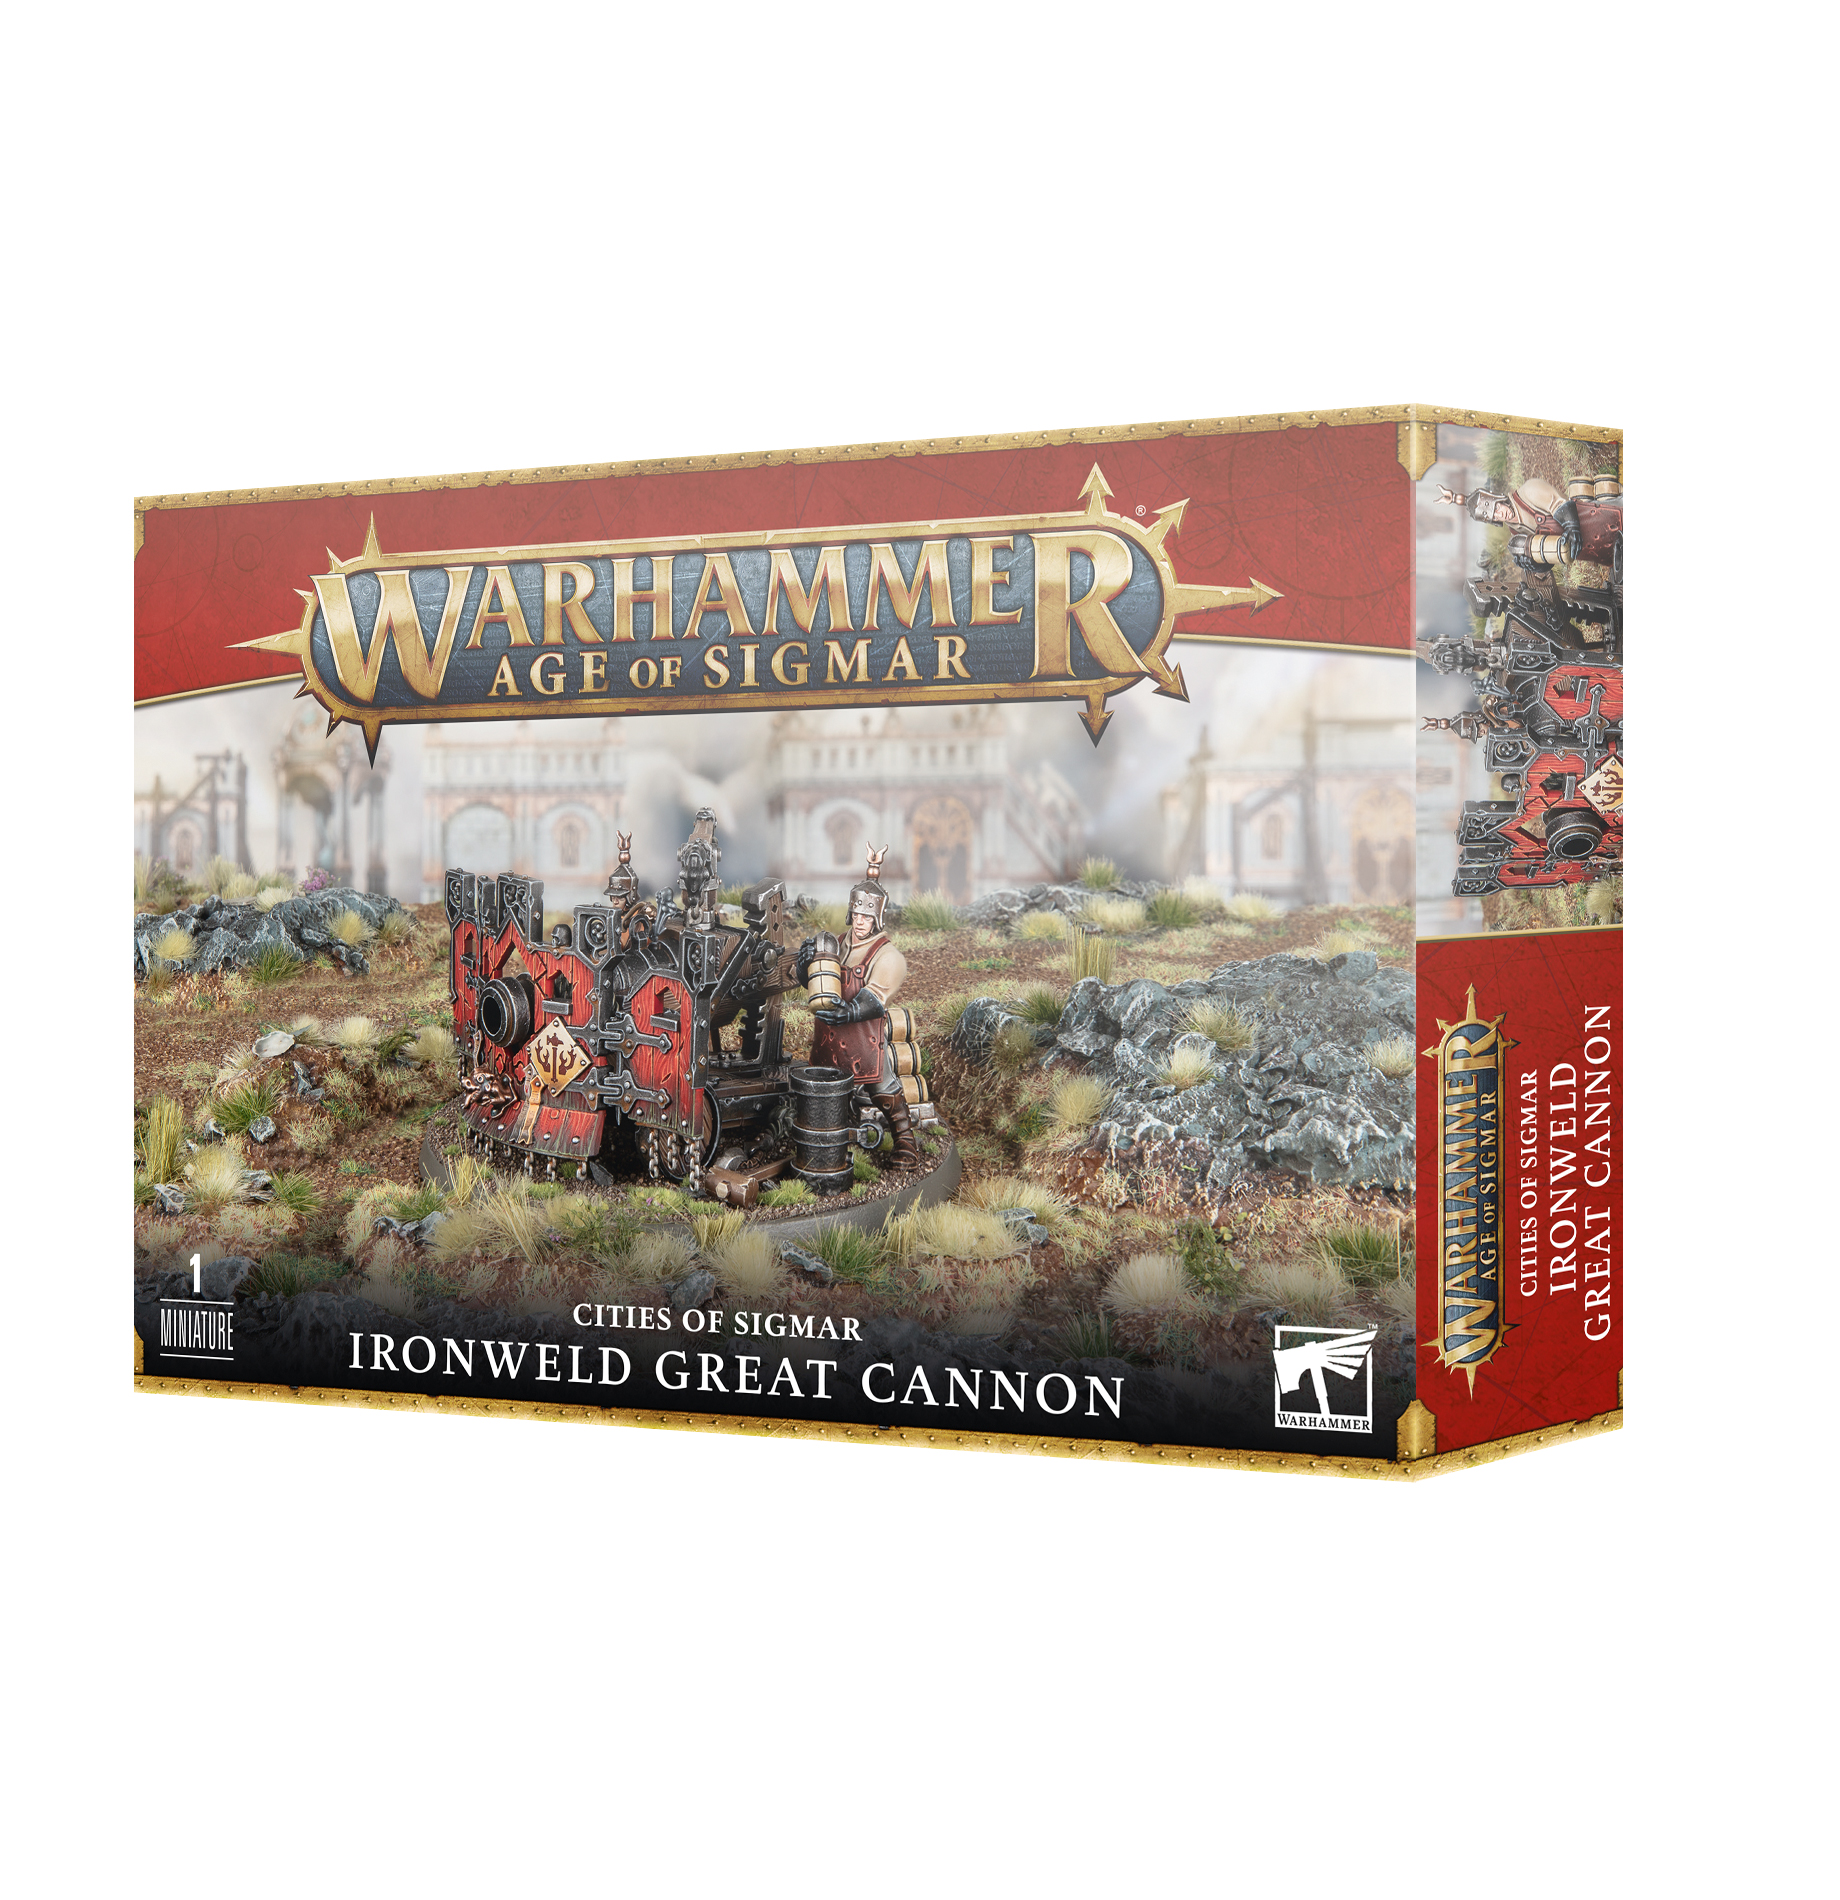 Warhammer Age of Sigmar: Cities of Sigmar: Ironweld Great Cannon 